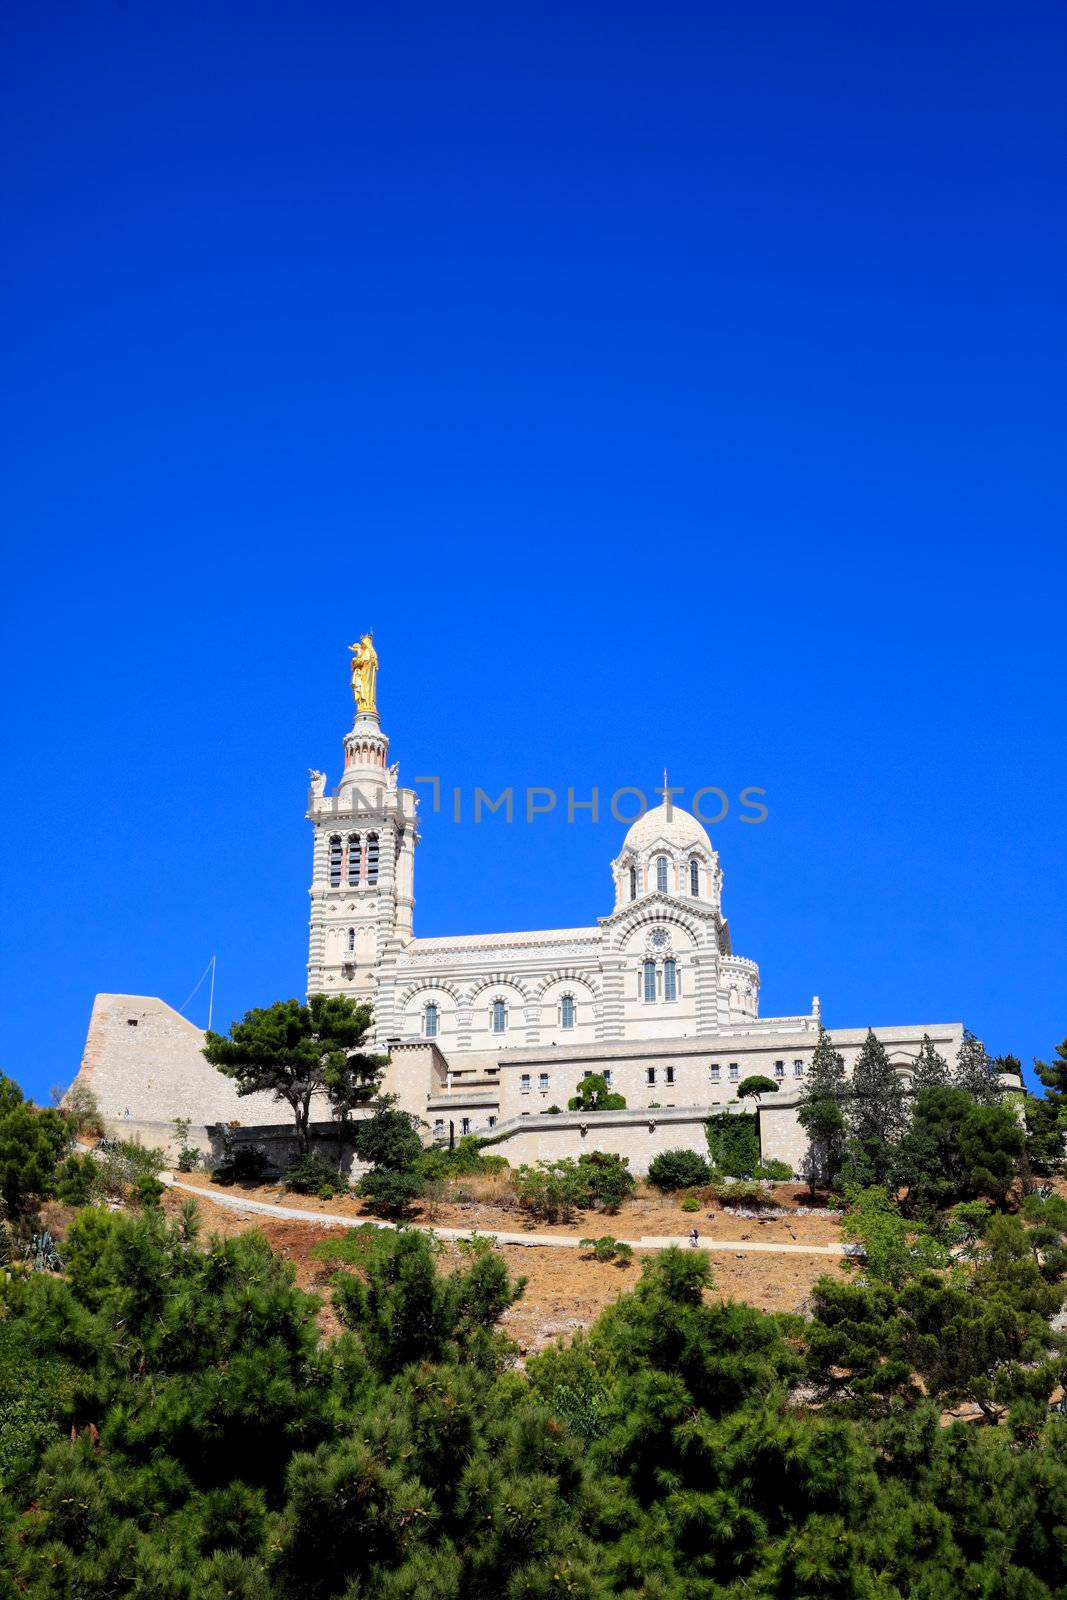 Cathedral Notre Dame in Marseille City, France

